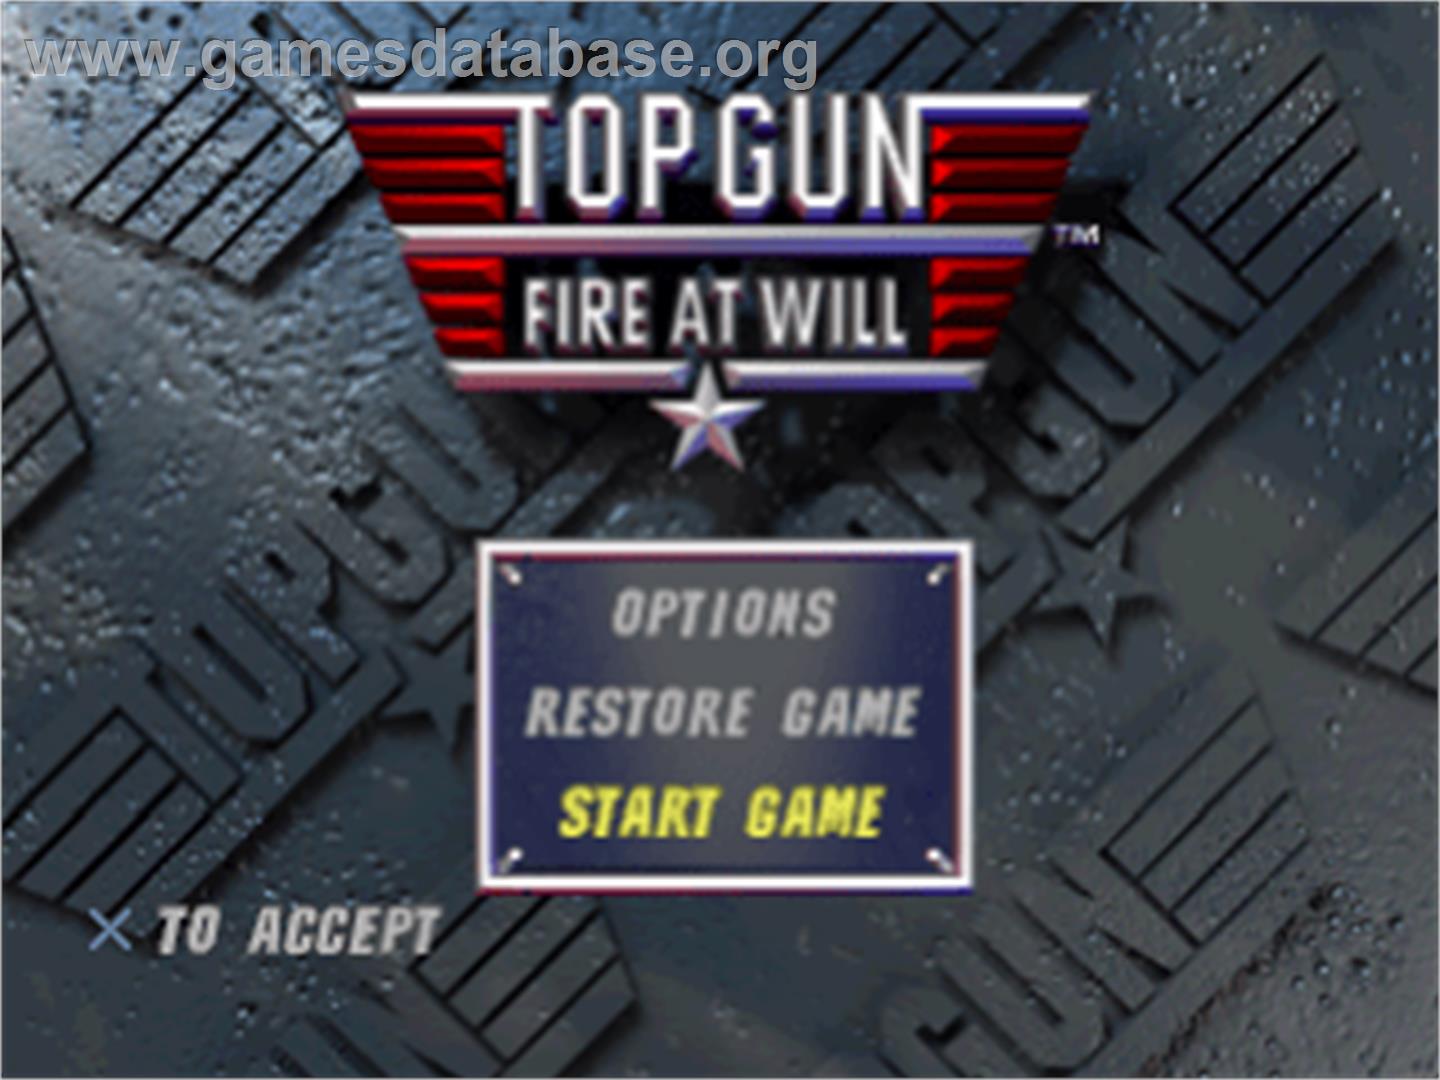 Top Gun: Fire at Will - Sony Playstation - Artwork - Title Screen